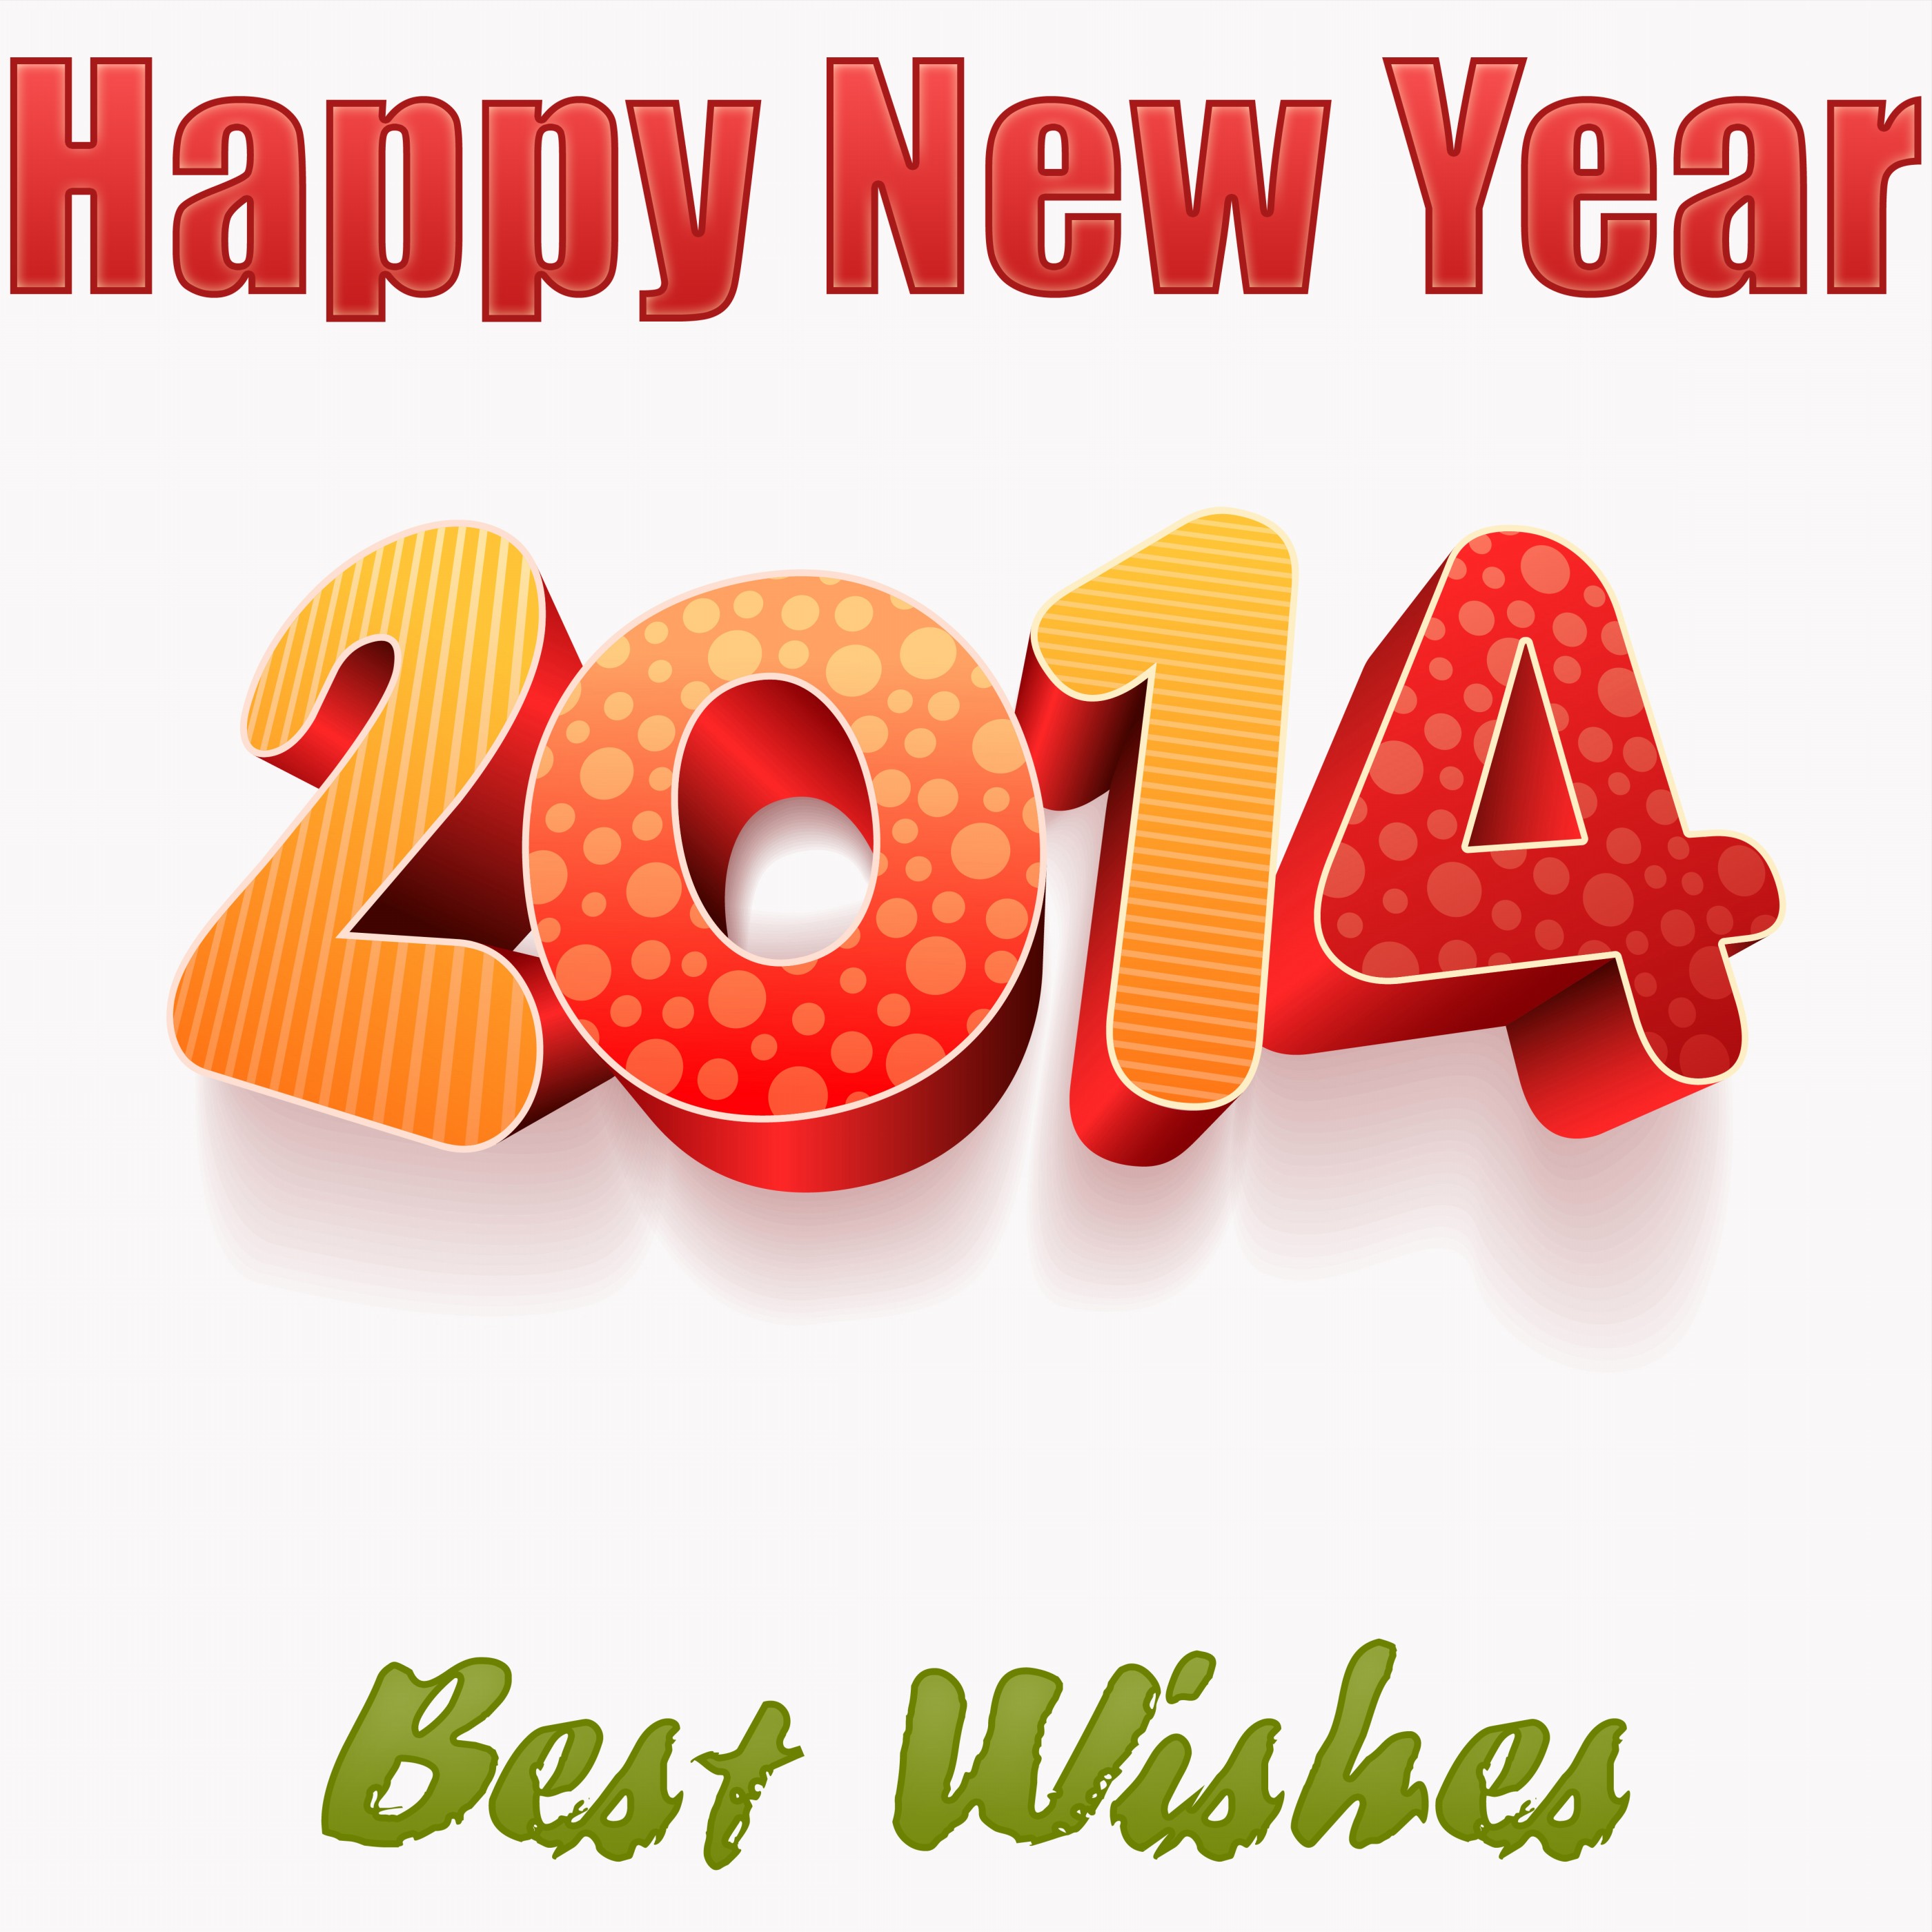     Year 2014 For Kids Printable Clip Art Of Happy New Year 2014 For Kids